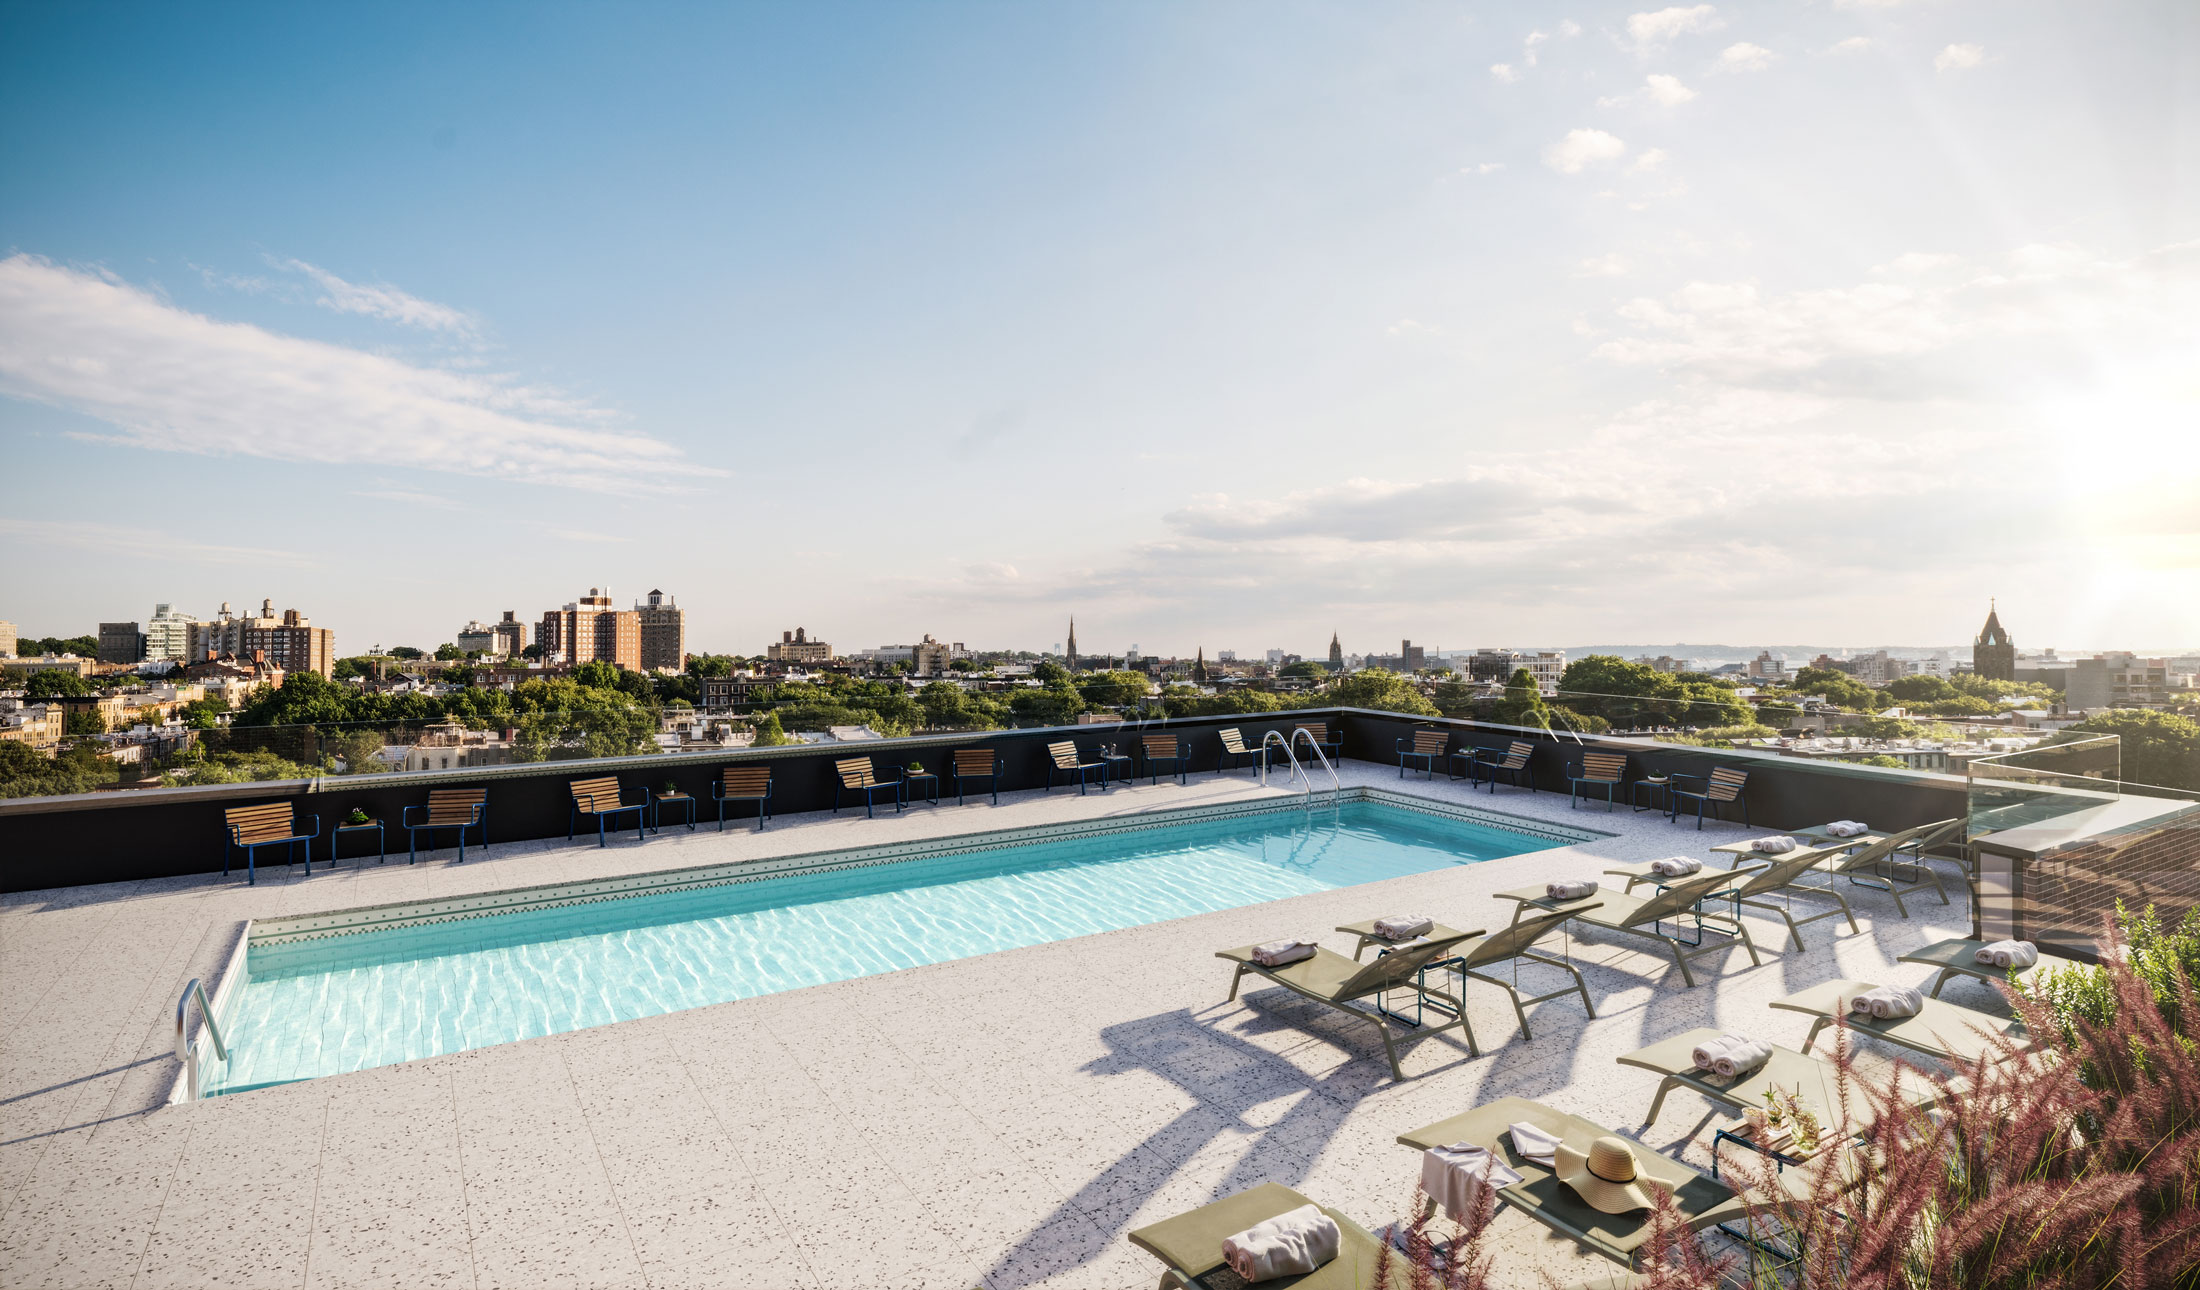 Architectural Rendering of the pool deck of the 595 Dean St project located in Brooklyn, New York